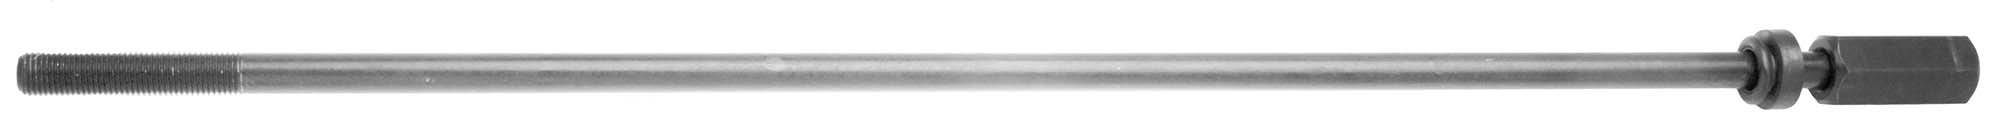 Accurate Mfg Z9004  1J 20-1/4" Replacement Drawbar